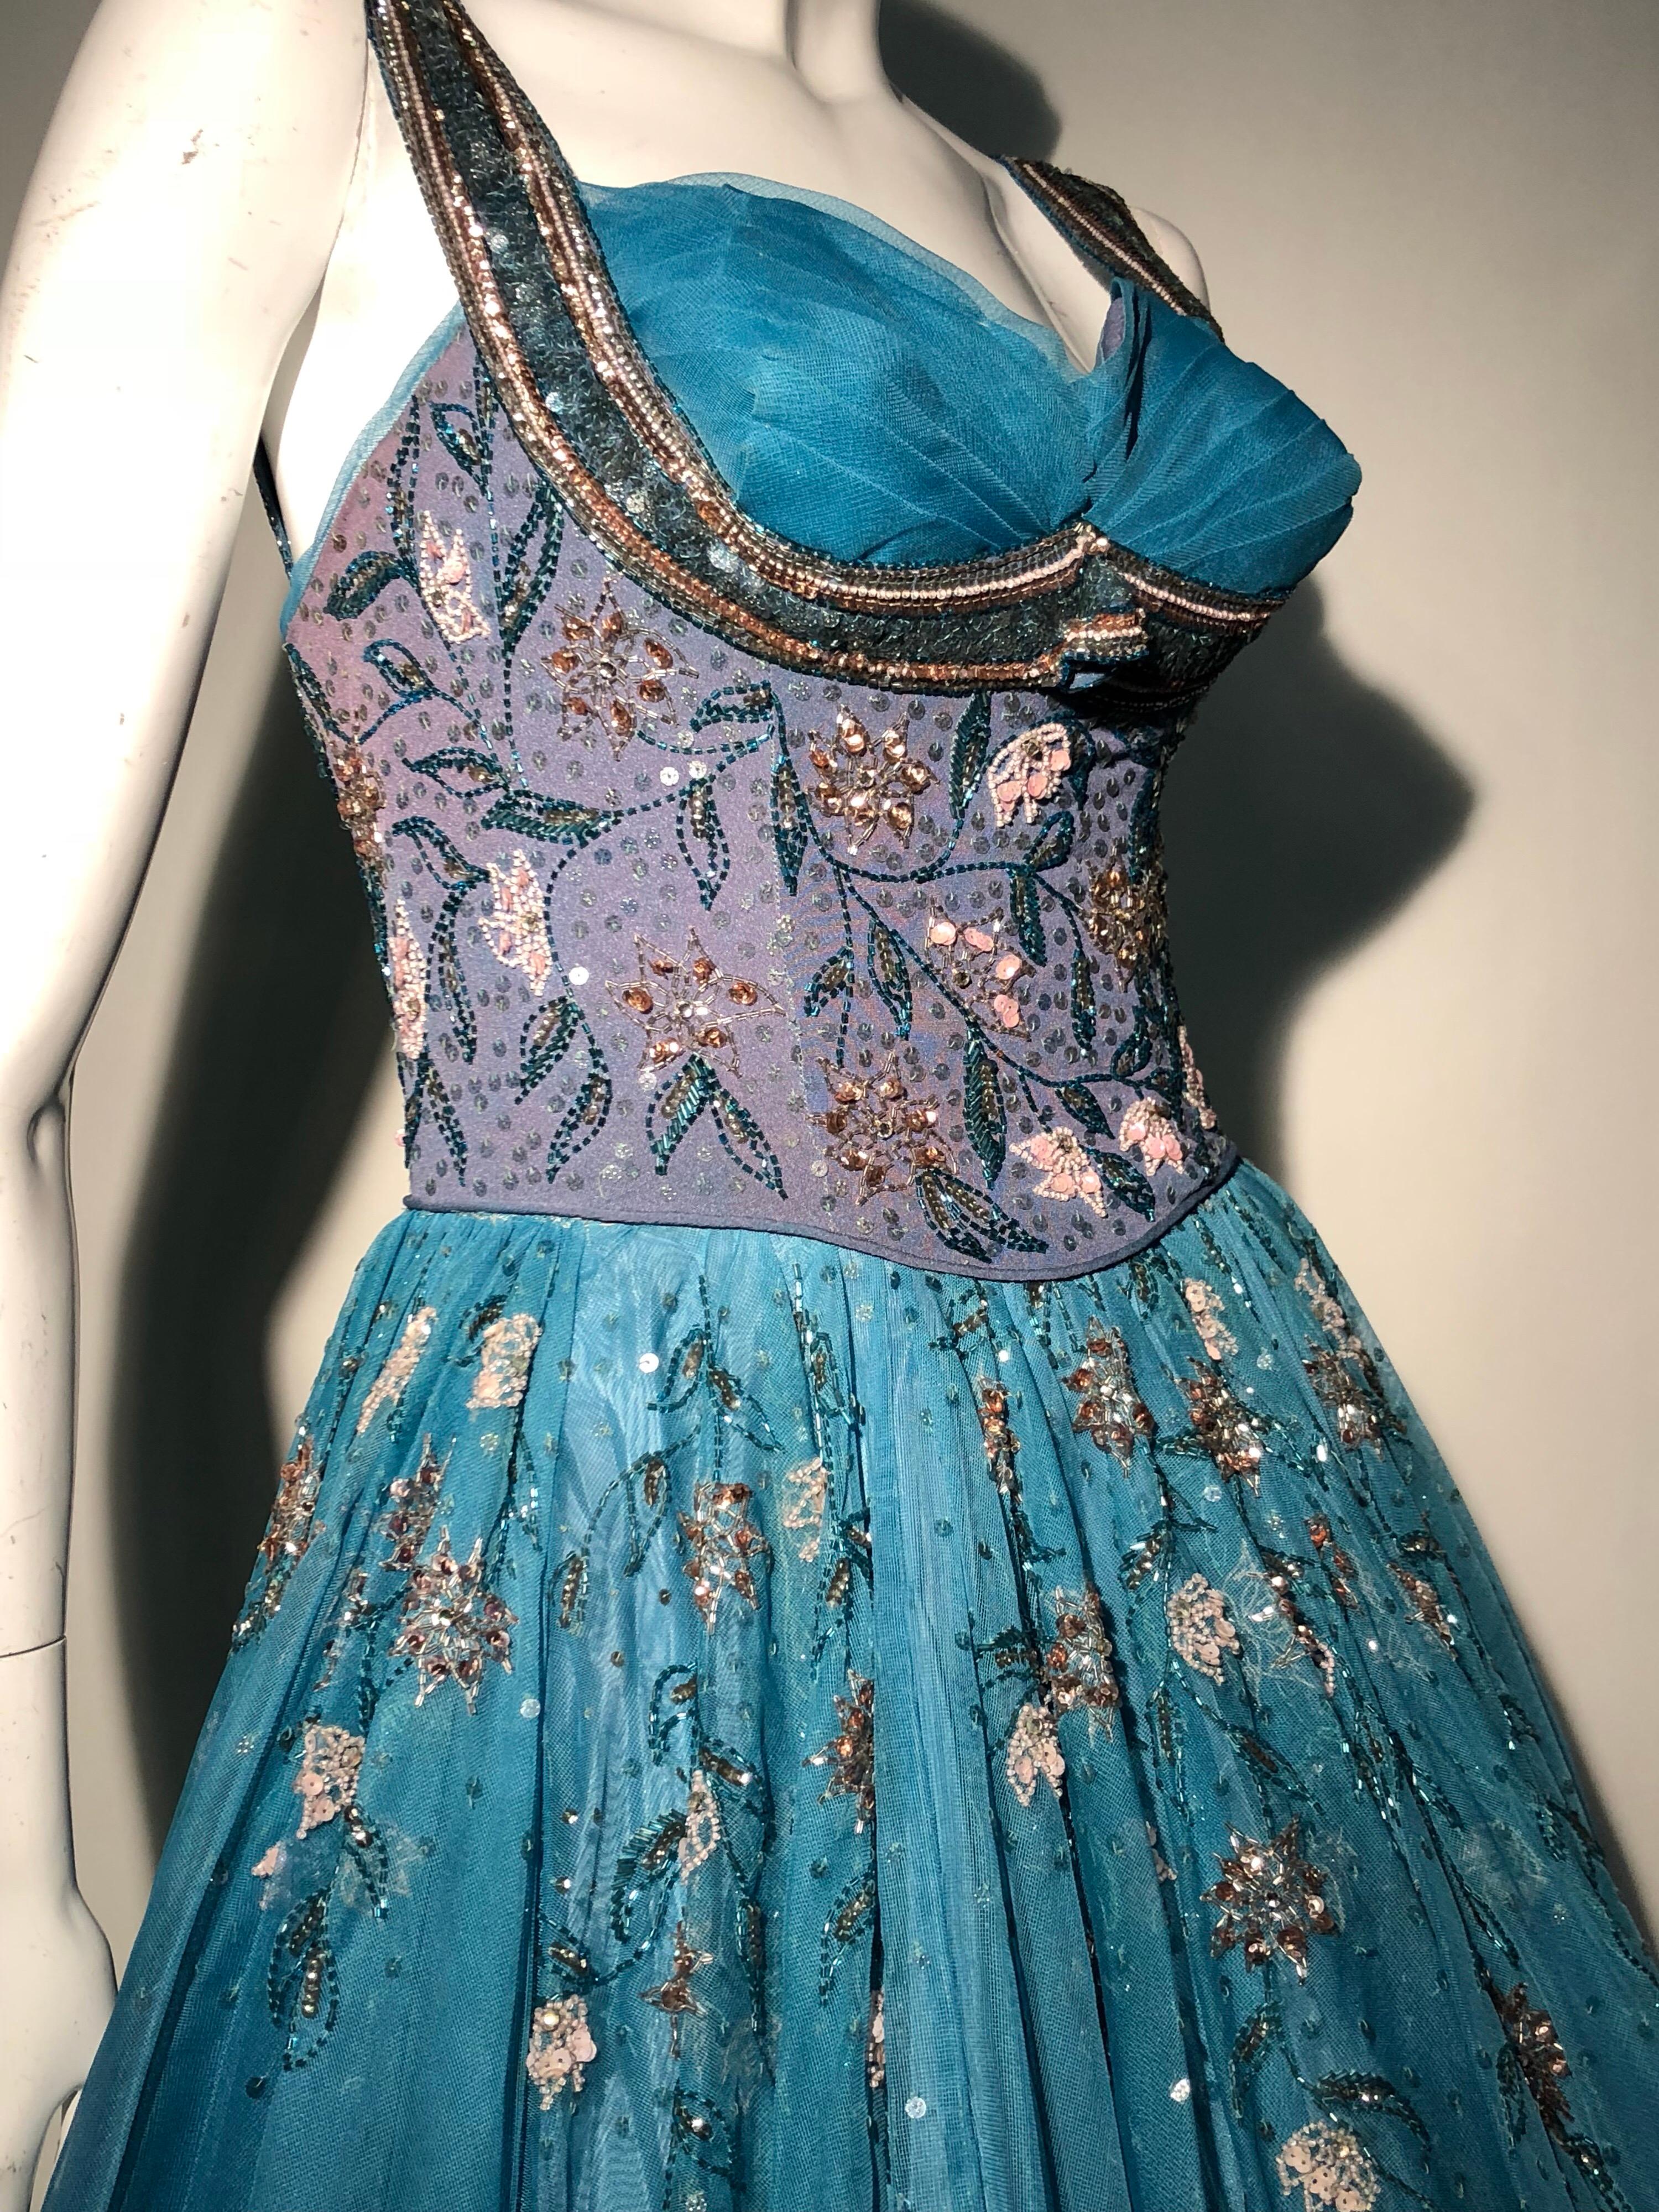 1950s MGM Mme. Etoile by Irene Sharaff Couture Ball Gown in Deep Teal Silk For Sale 8